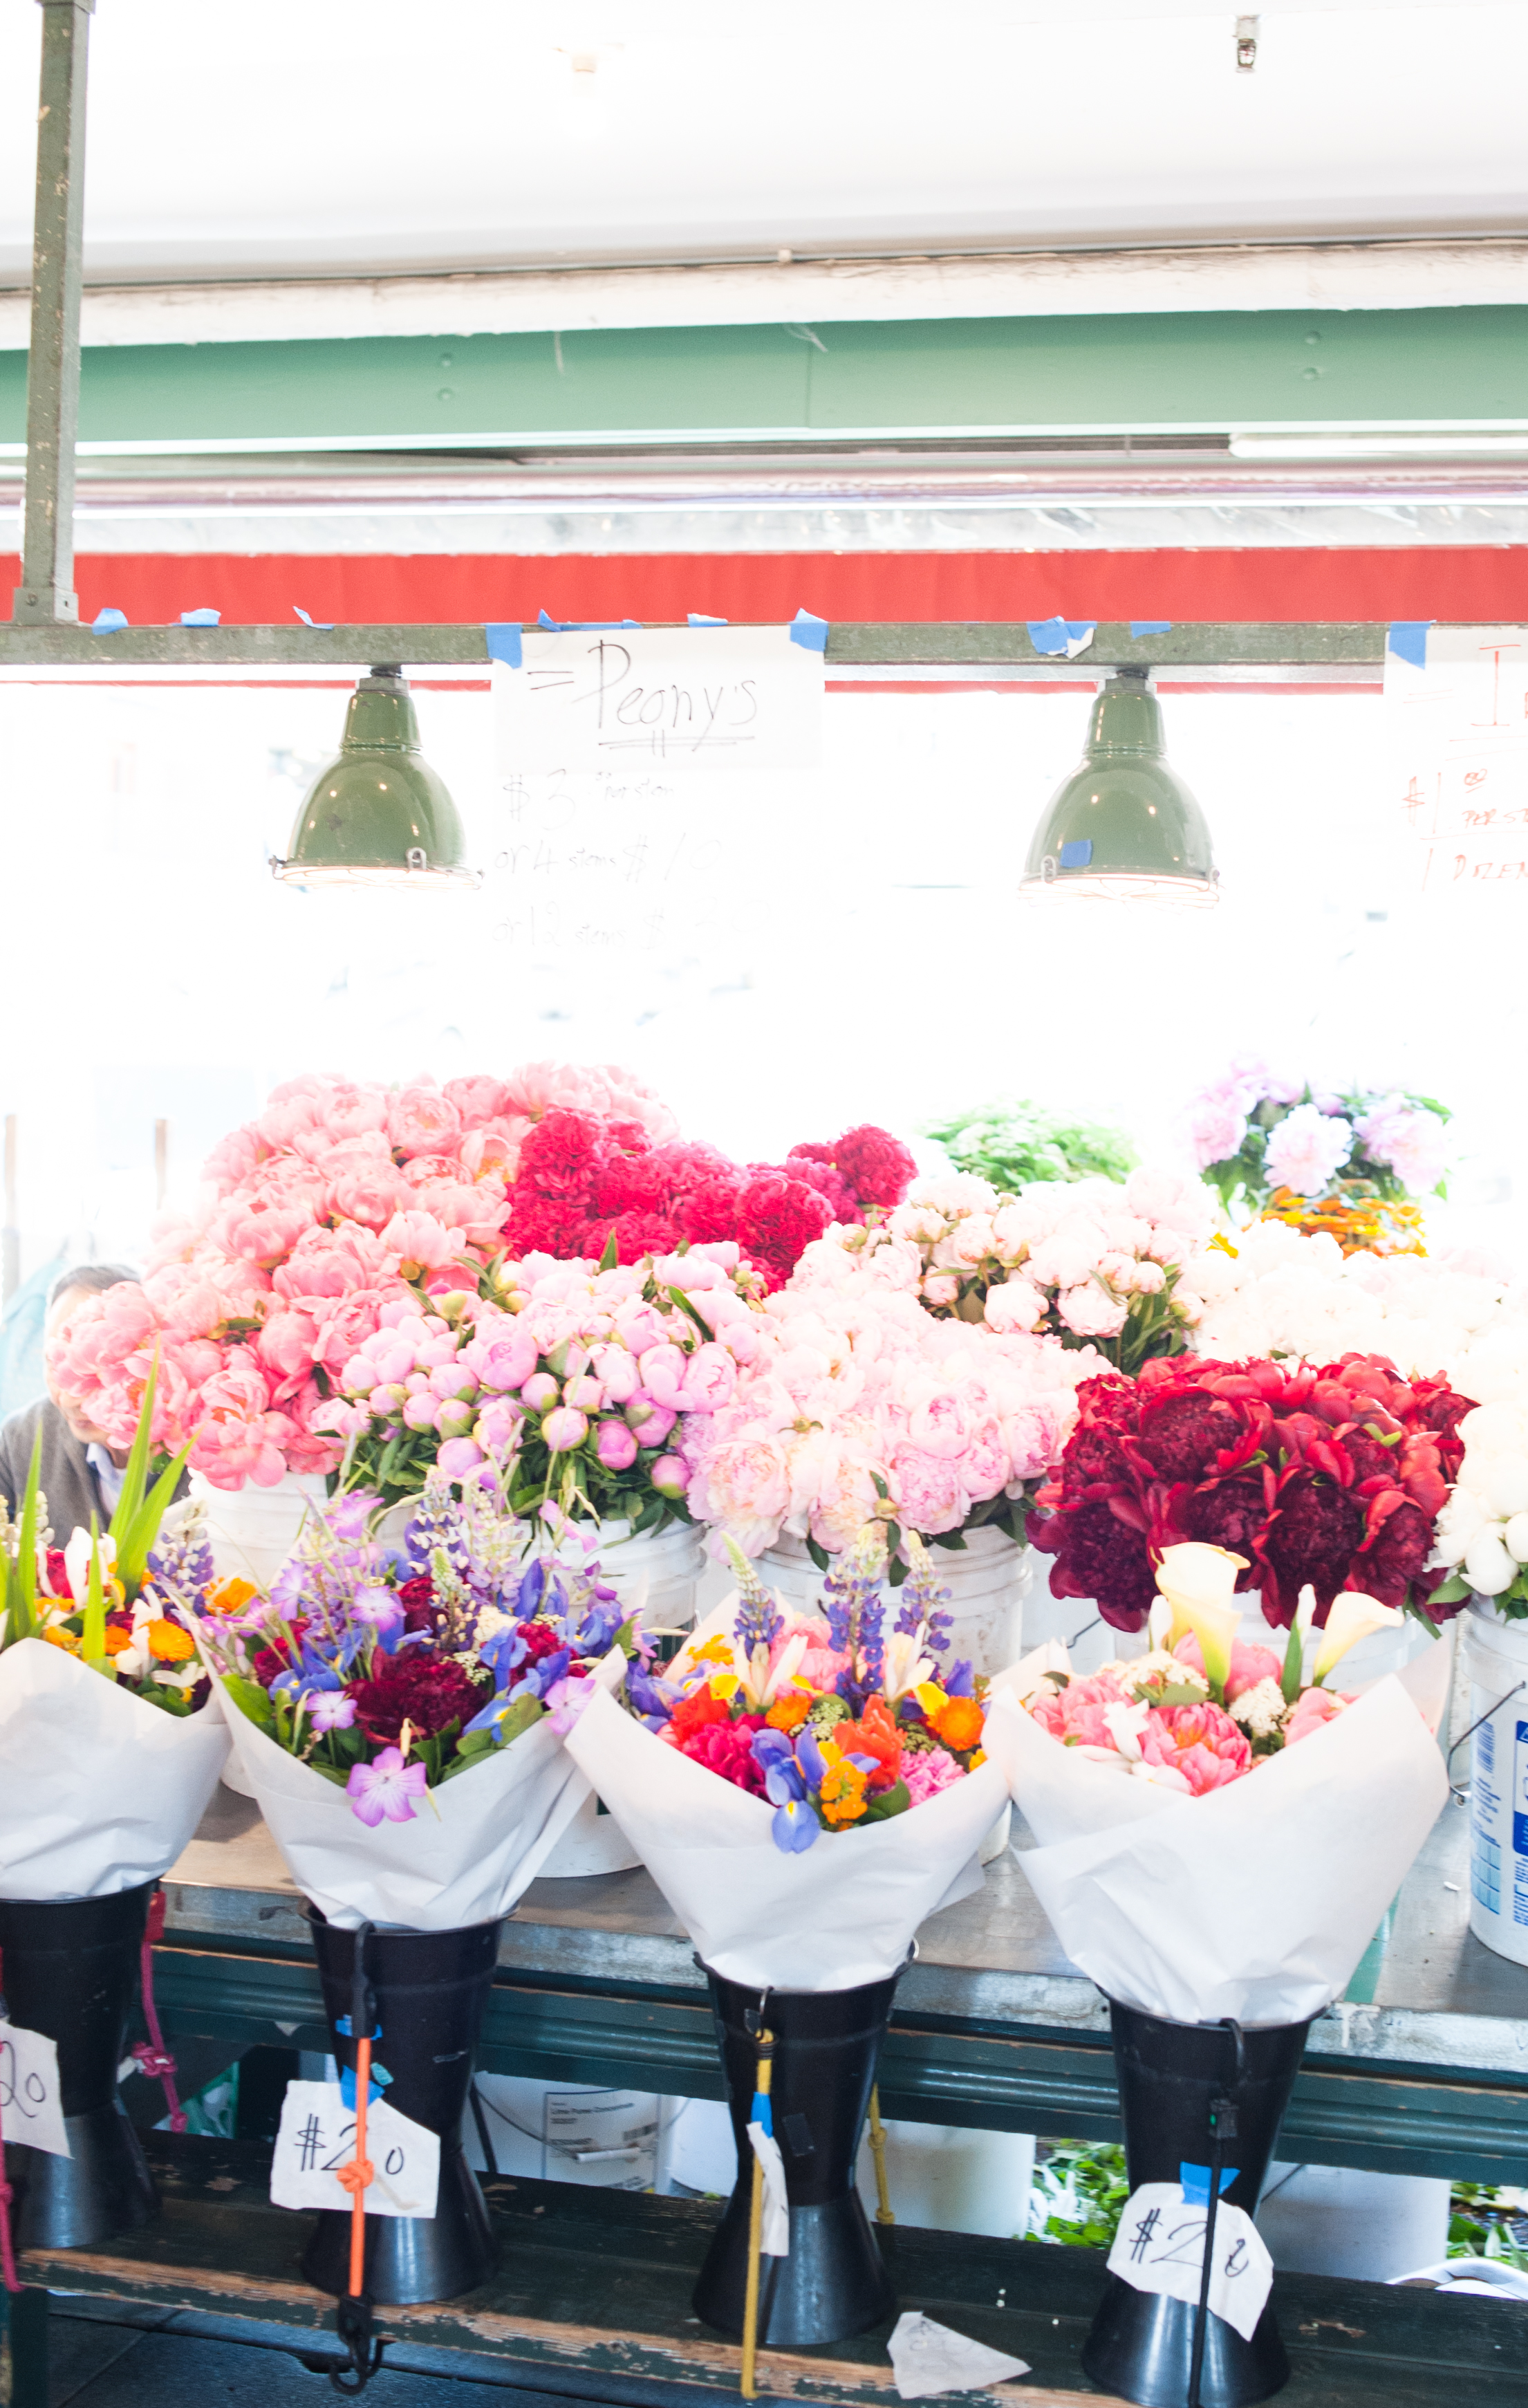 peony's stand at the public market place in seattle washington